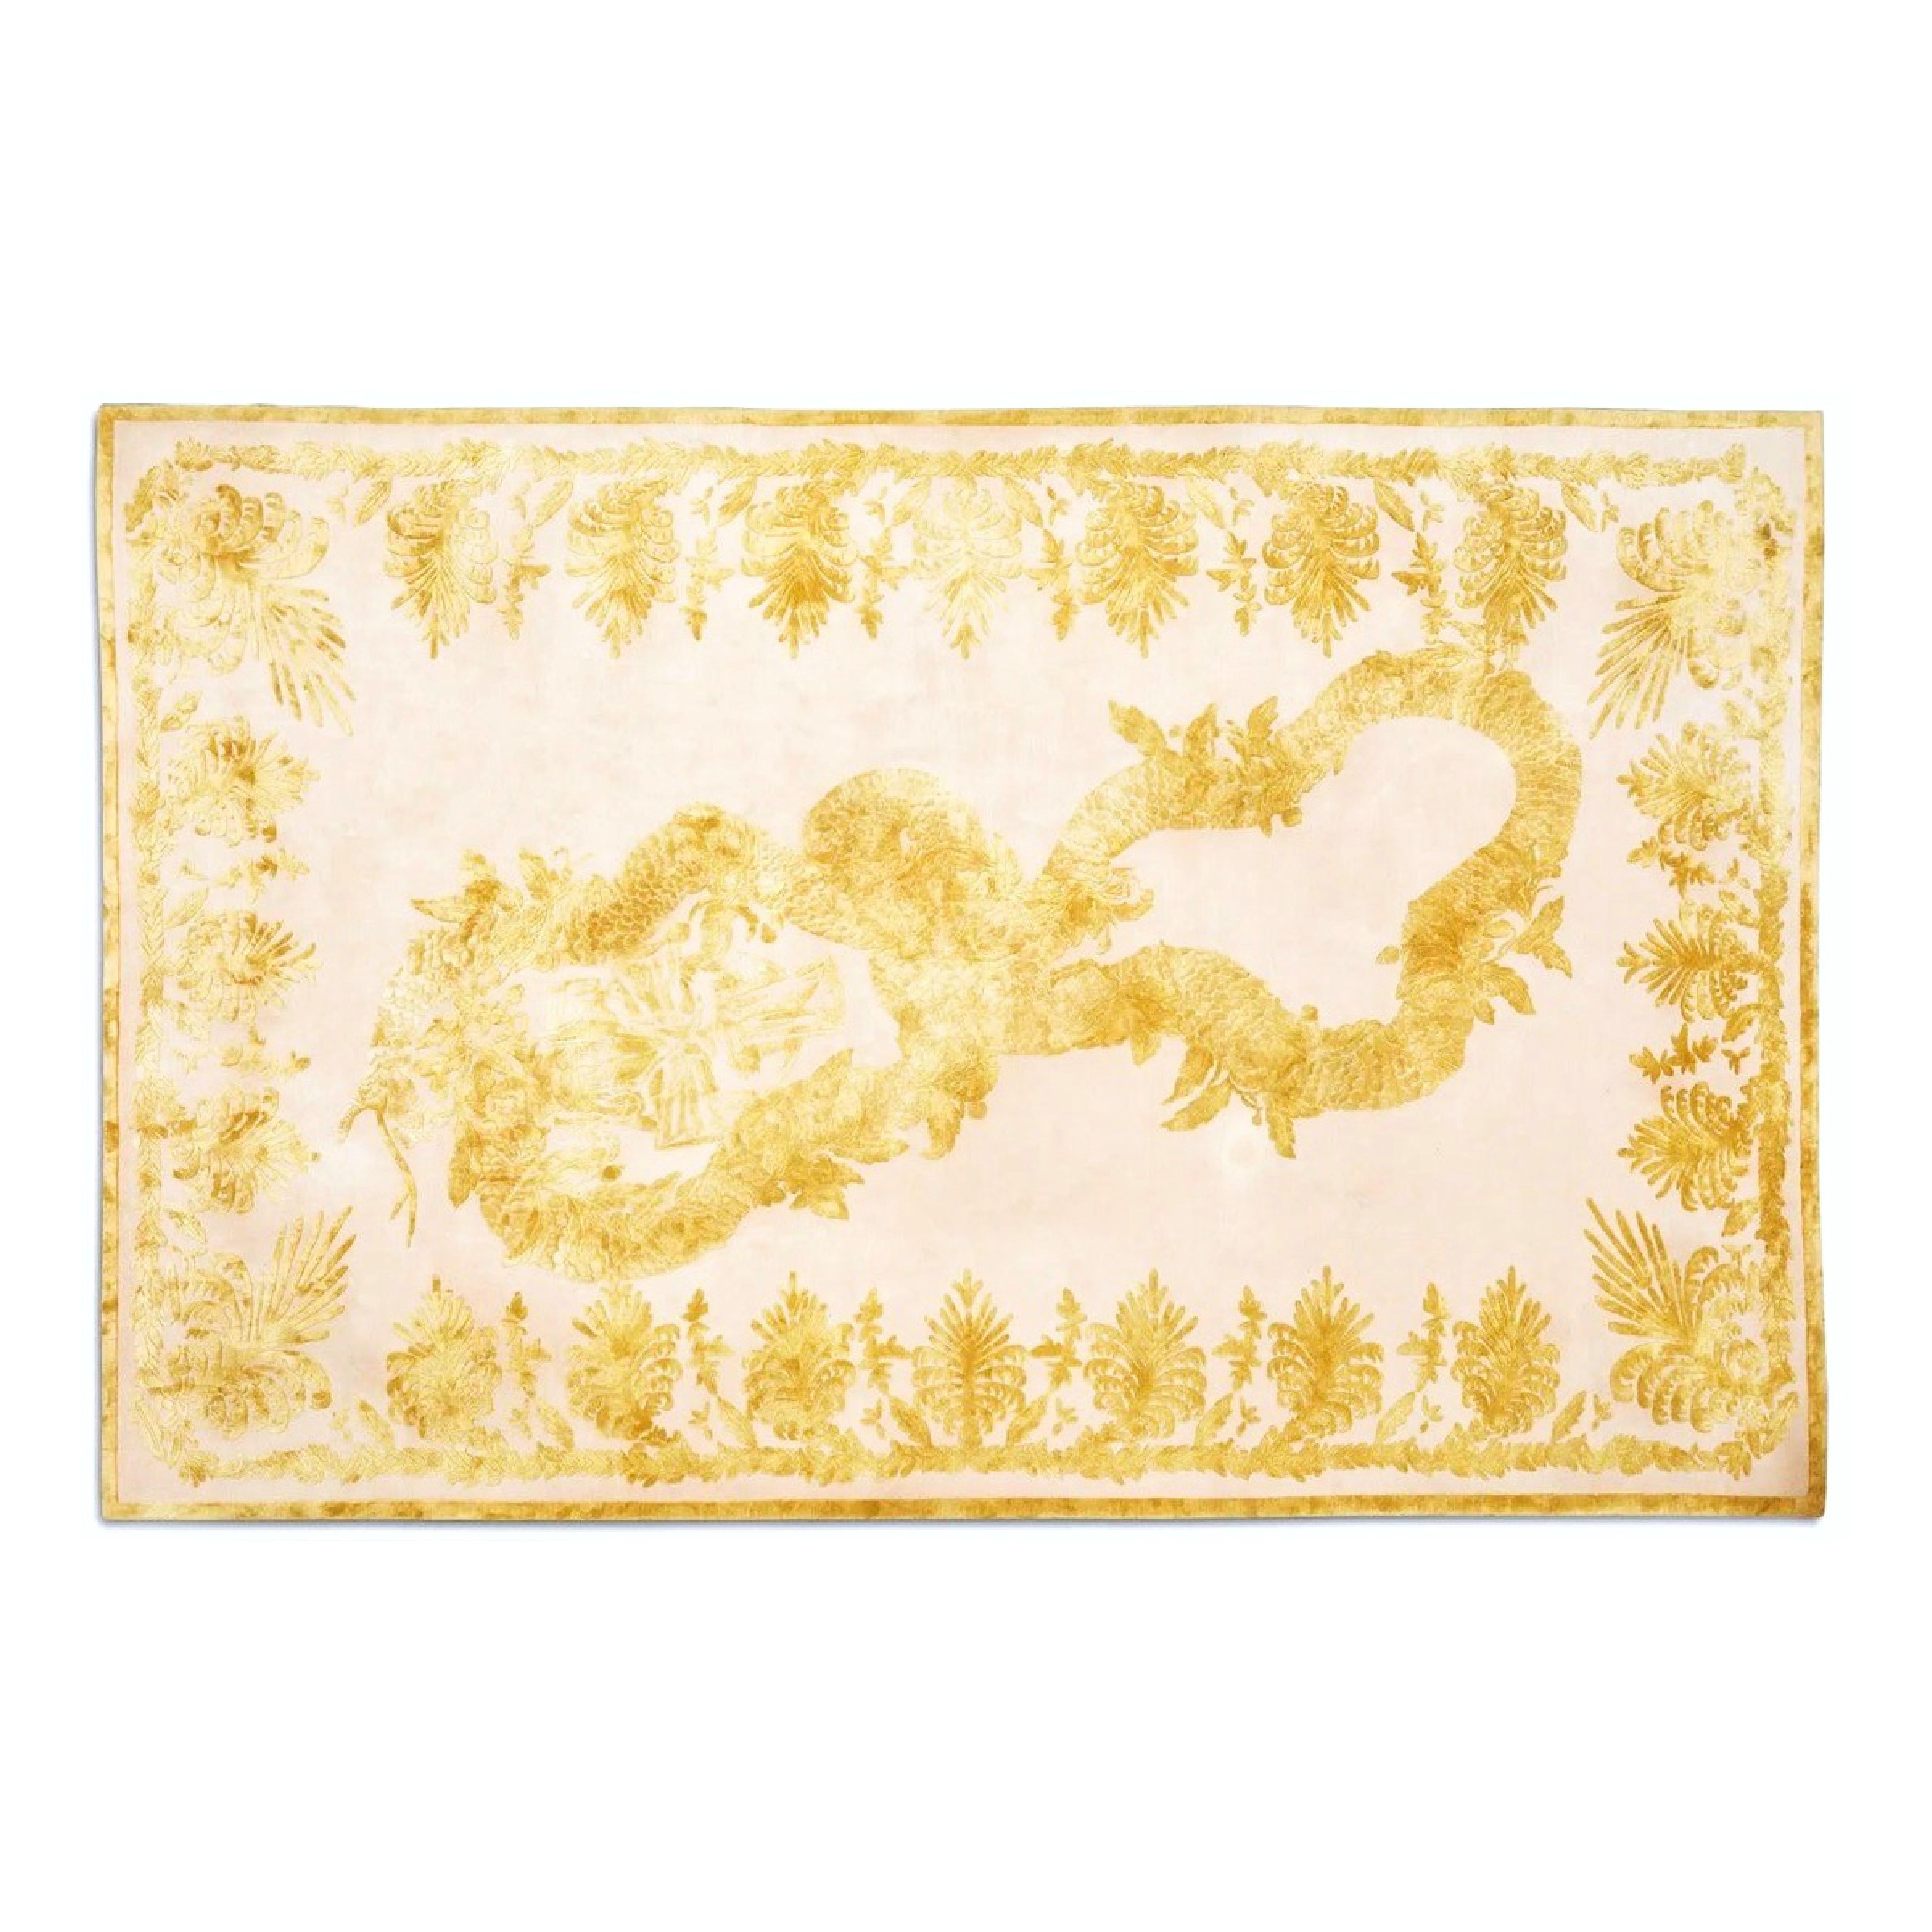 Nepalese Alexander McQueen Military Brocade Palatial Silk on Wool Hand-Knotted Rug, 2012 For Sale